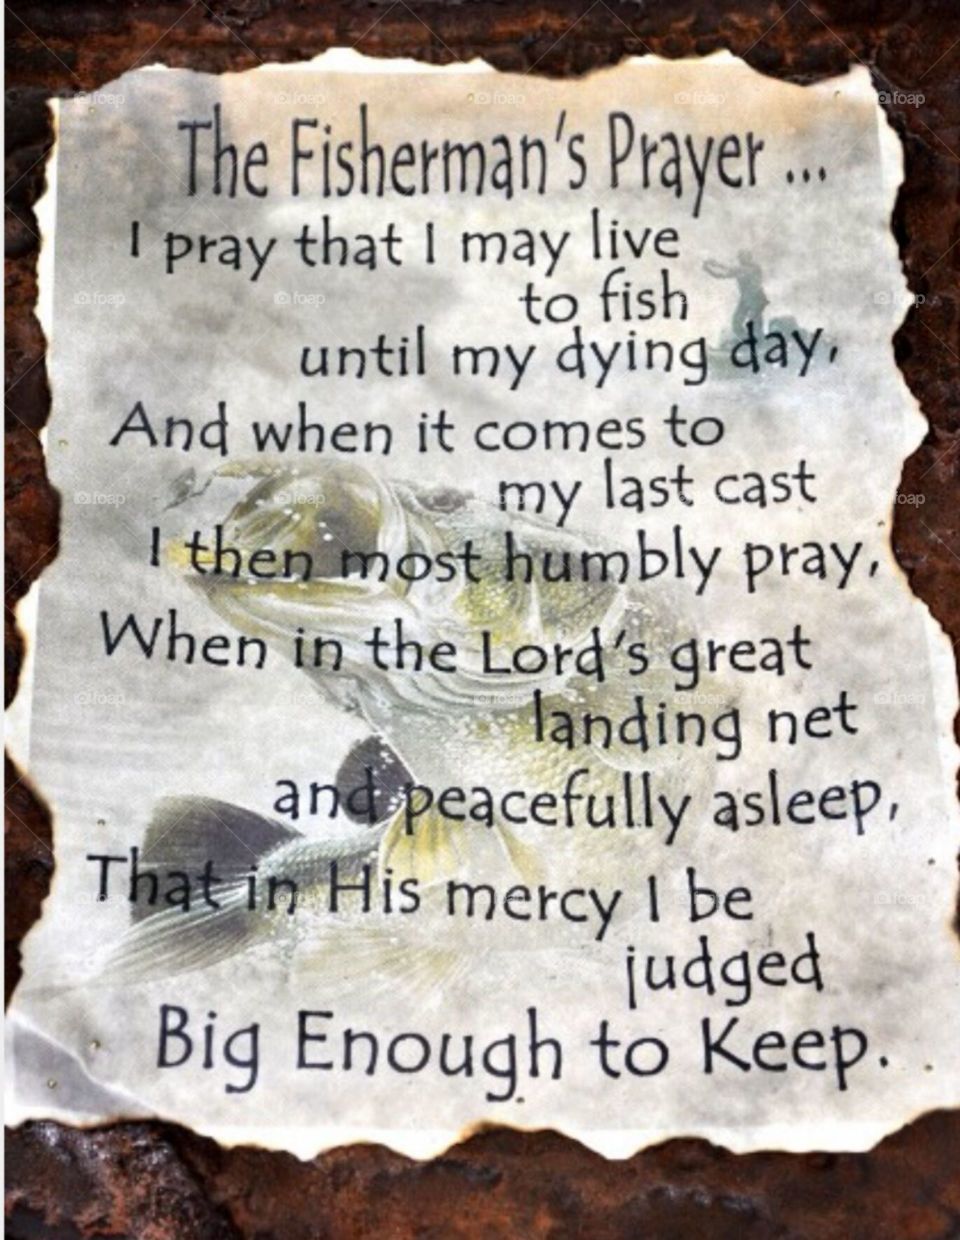 In memory of my pawpaw who lived most of his life fishing!